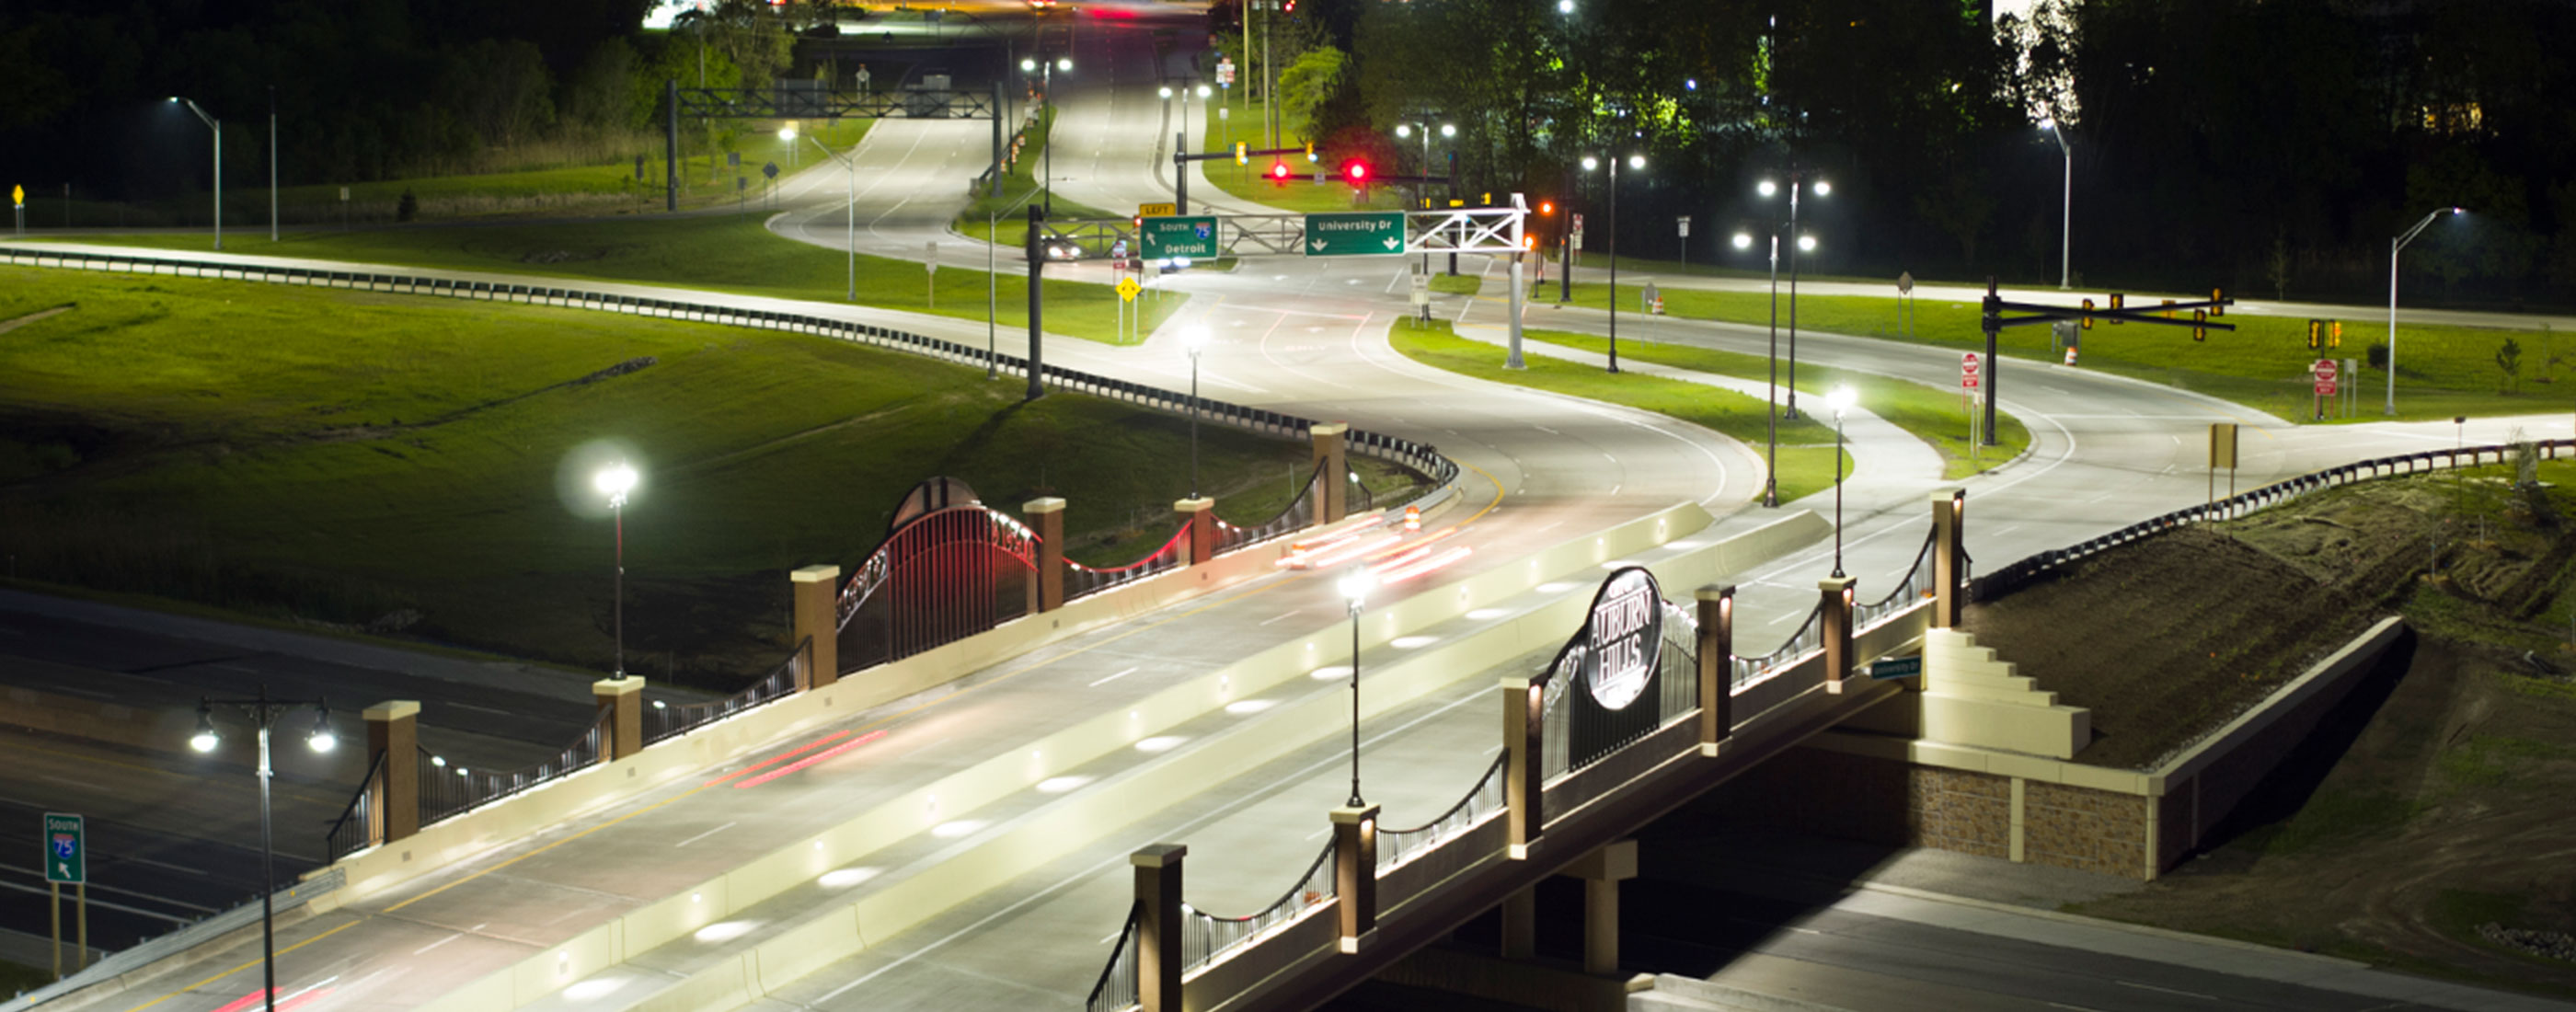 Bright lighting allows pedestrians to cross the bridge in Auburn Hills over I-75 safely.